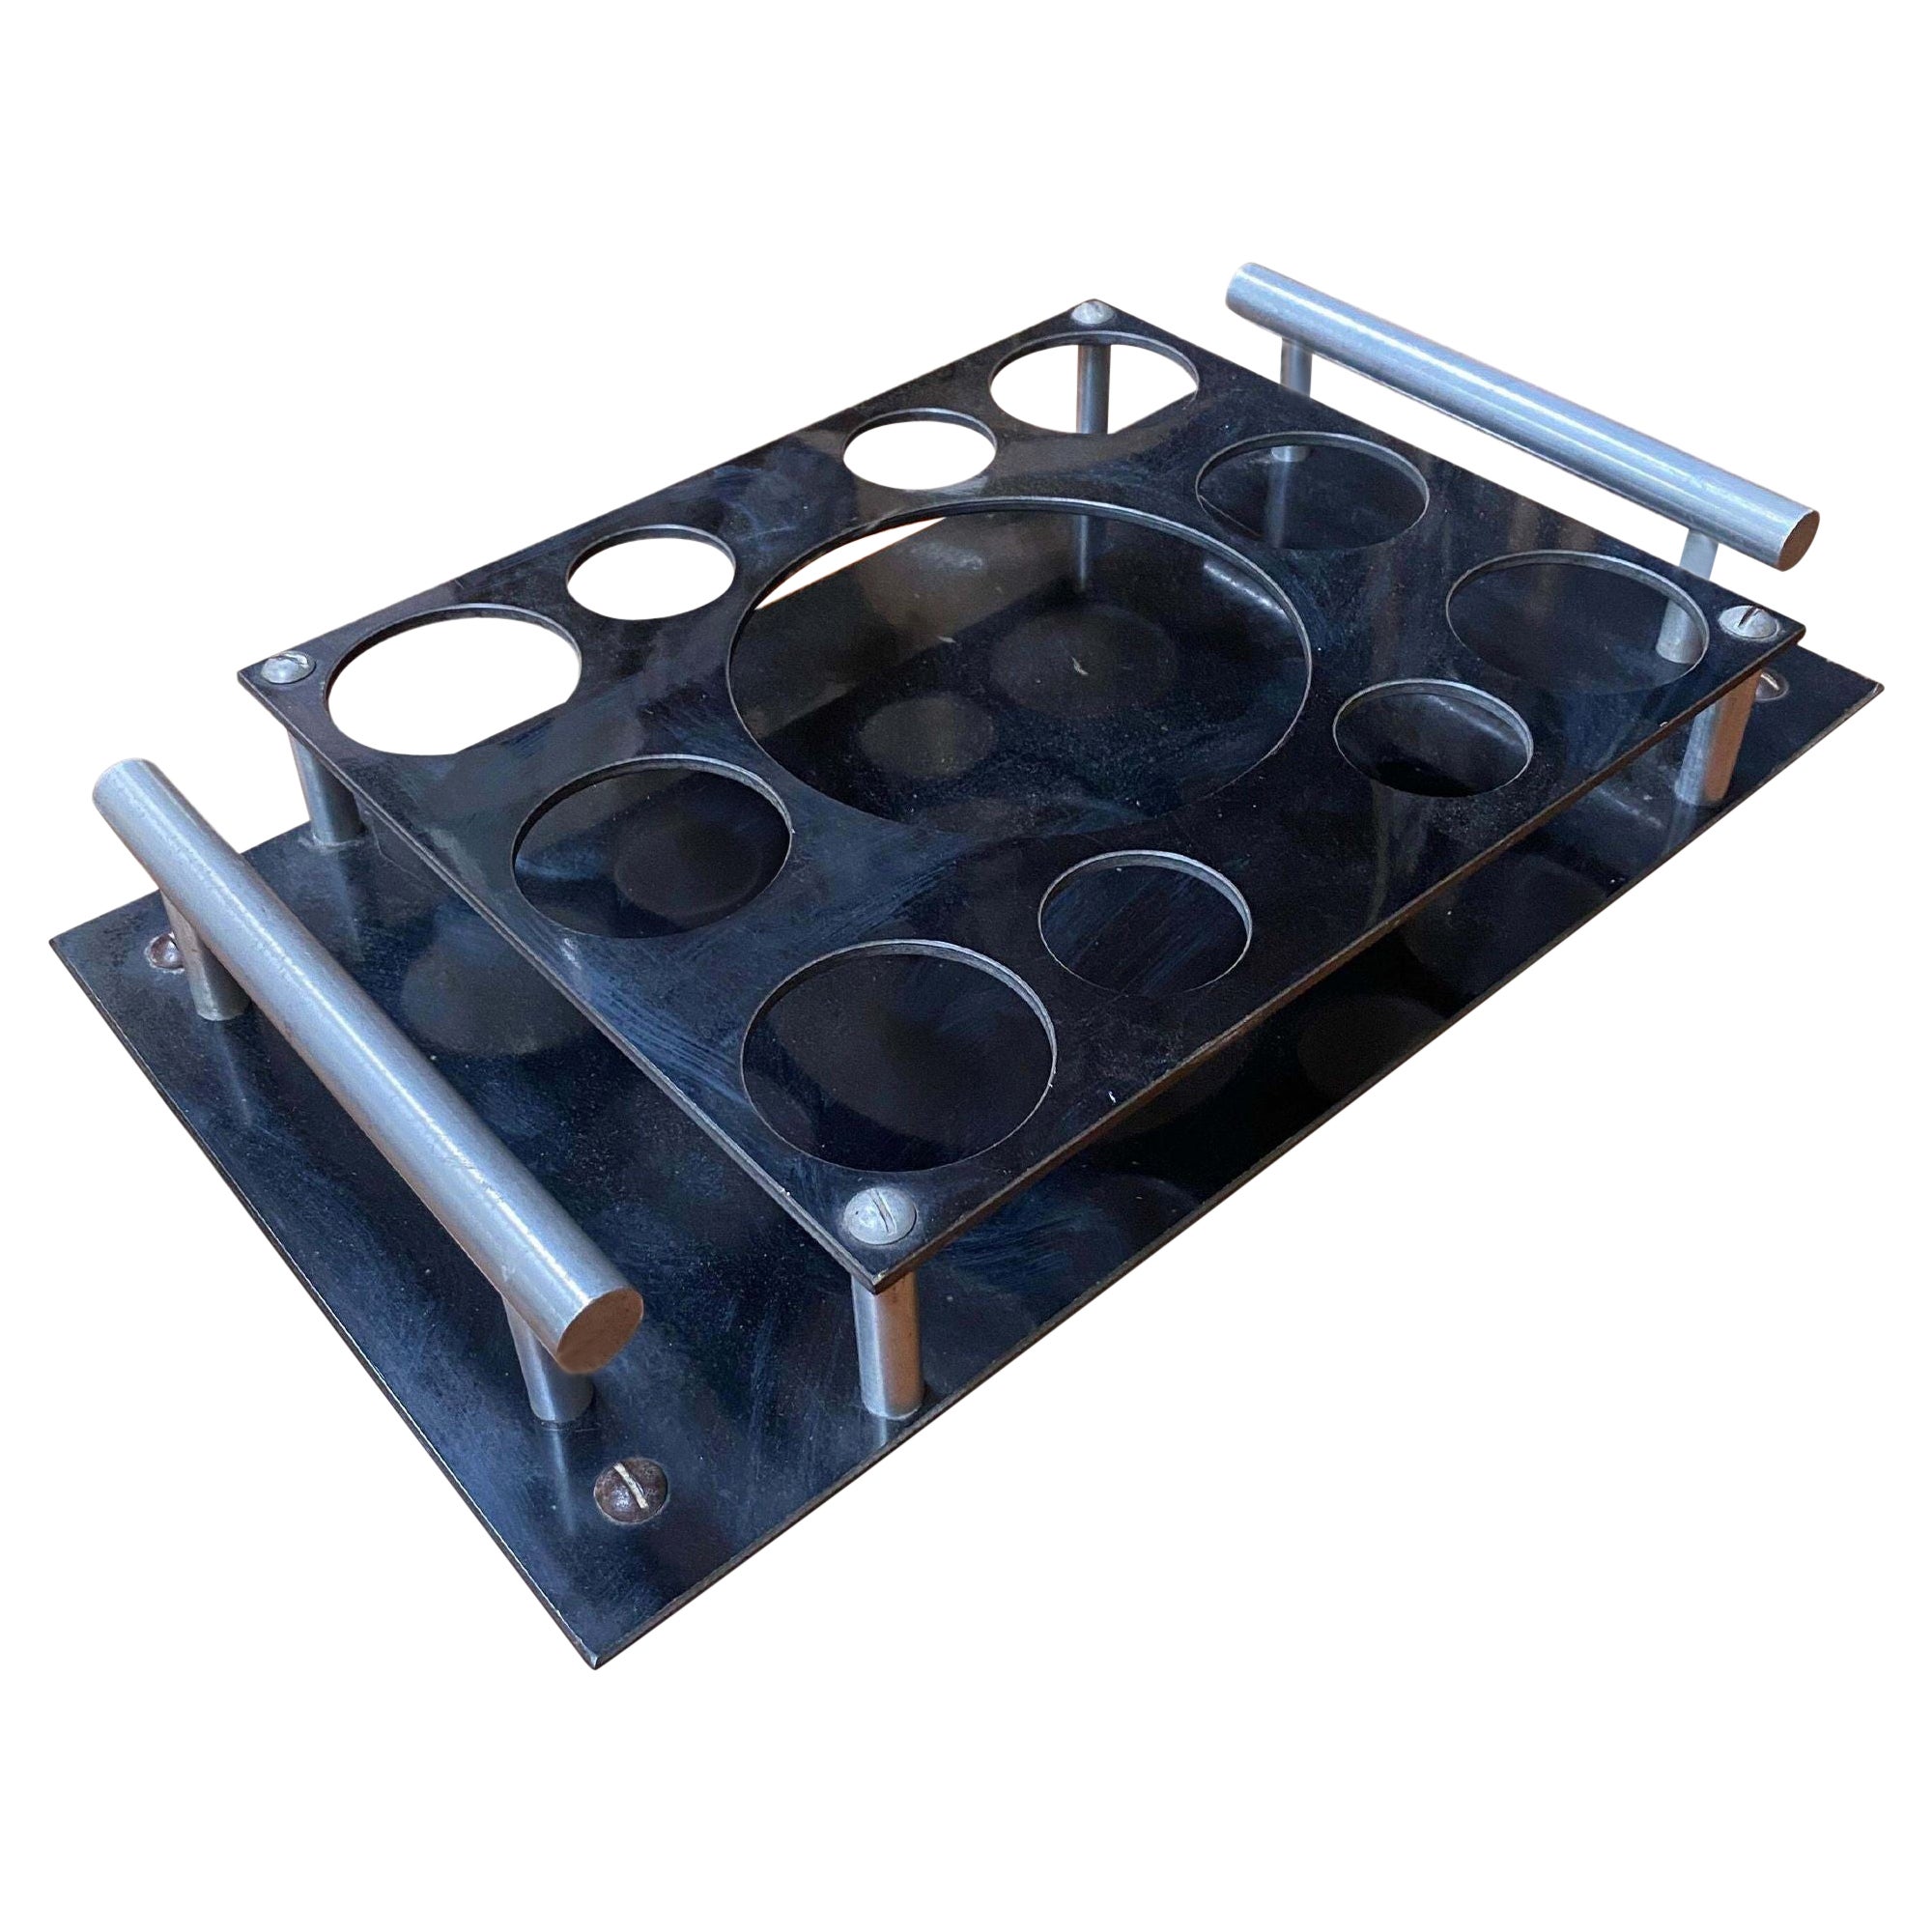 Aluminum and Bakelite Drink holder Tray by Aero-Art Los Angeles For Sale